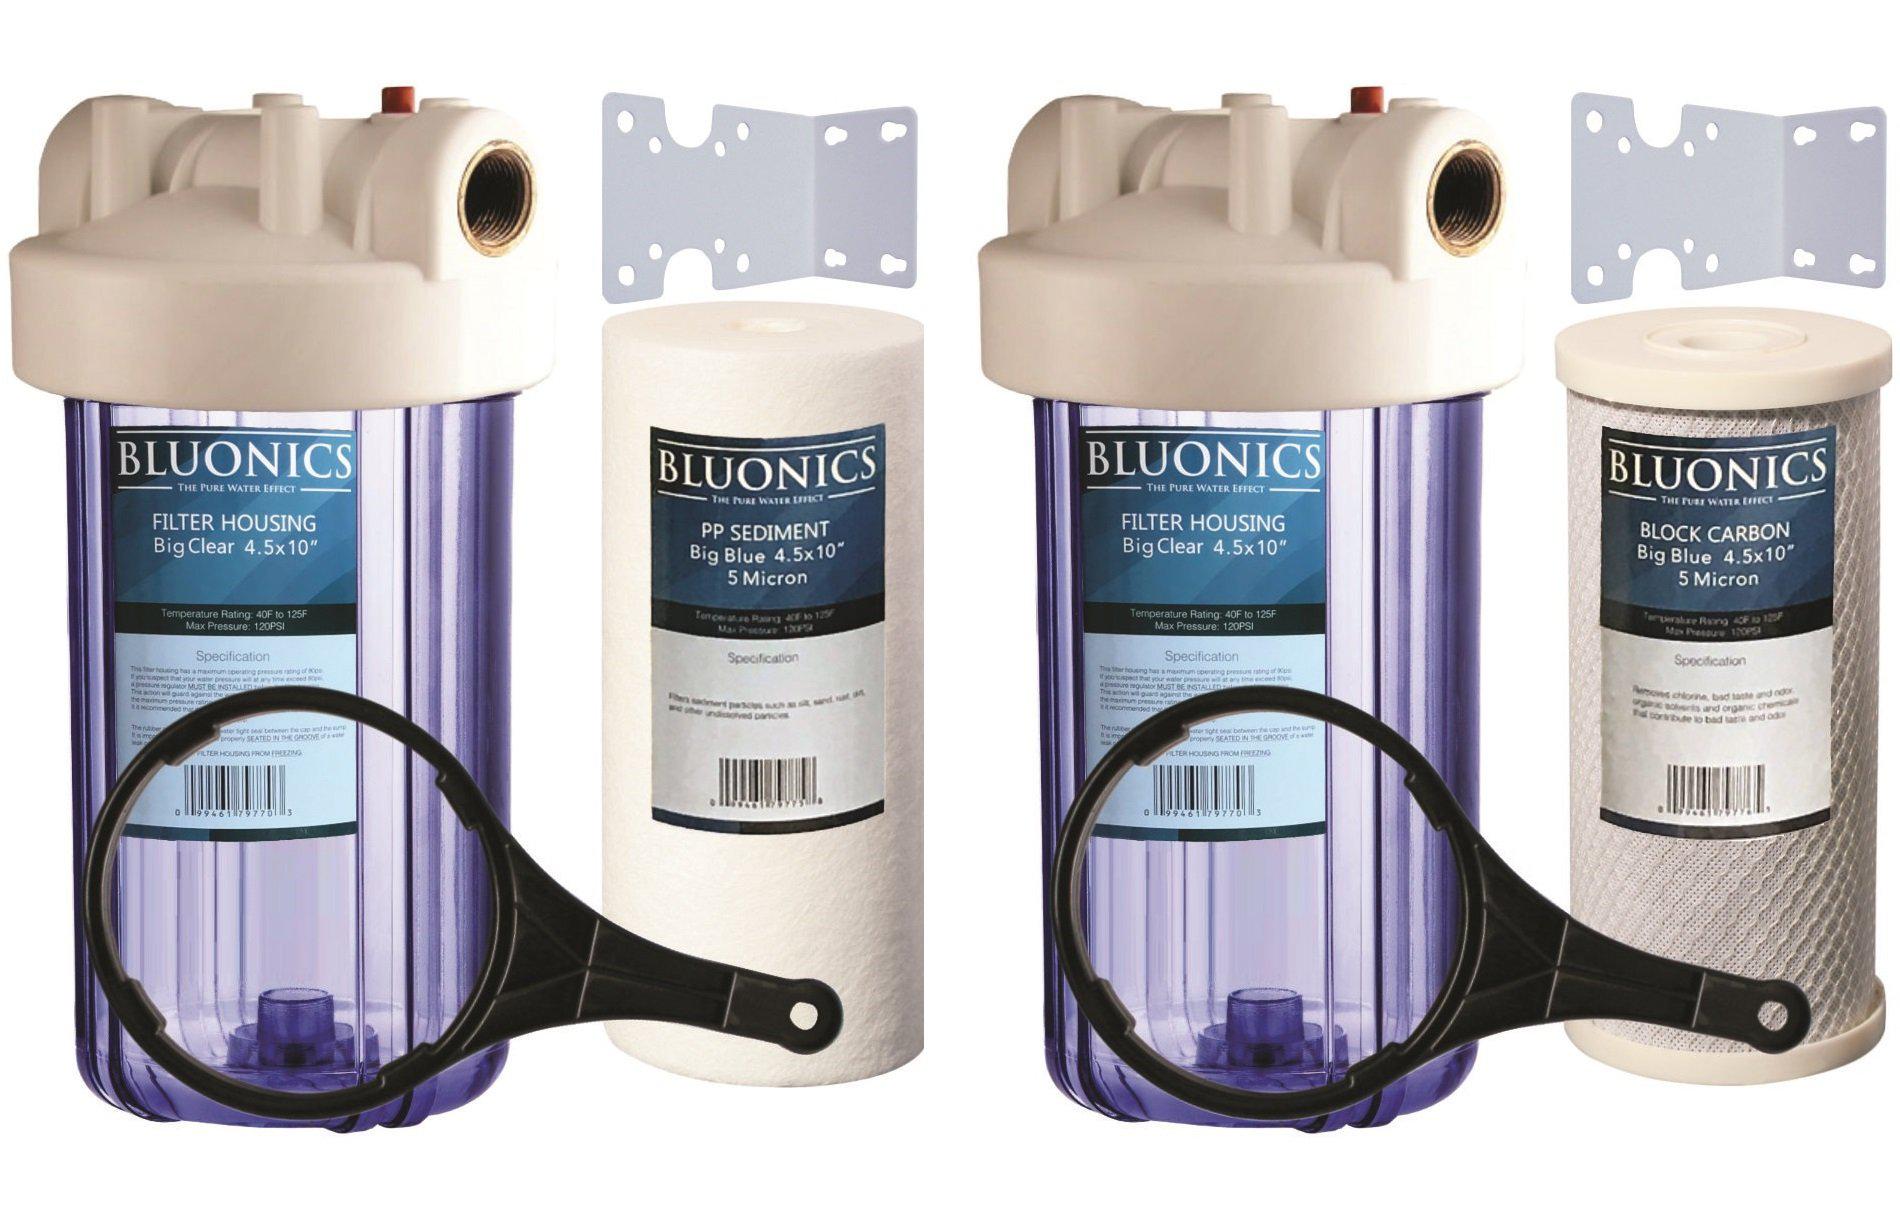 BLUONICS two 4.5 x 10" bluonics whole house water filters w/ sediment & carbon for rust, iron, sand, dirt, sediment, chlorine, insecti